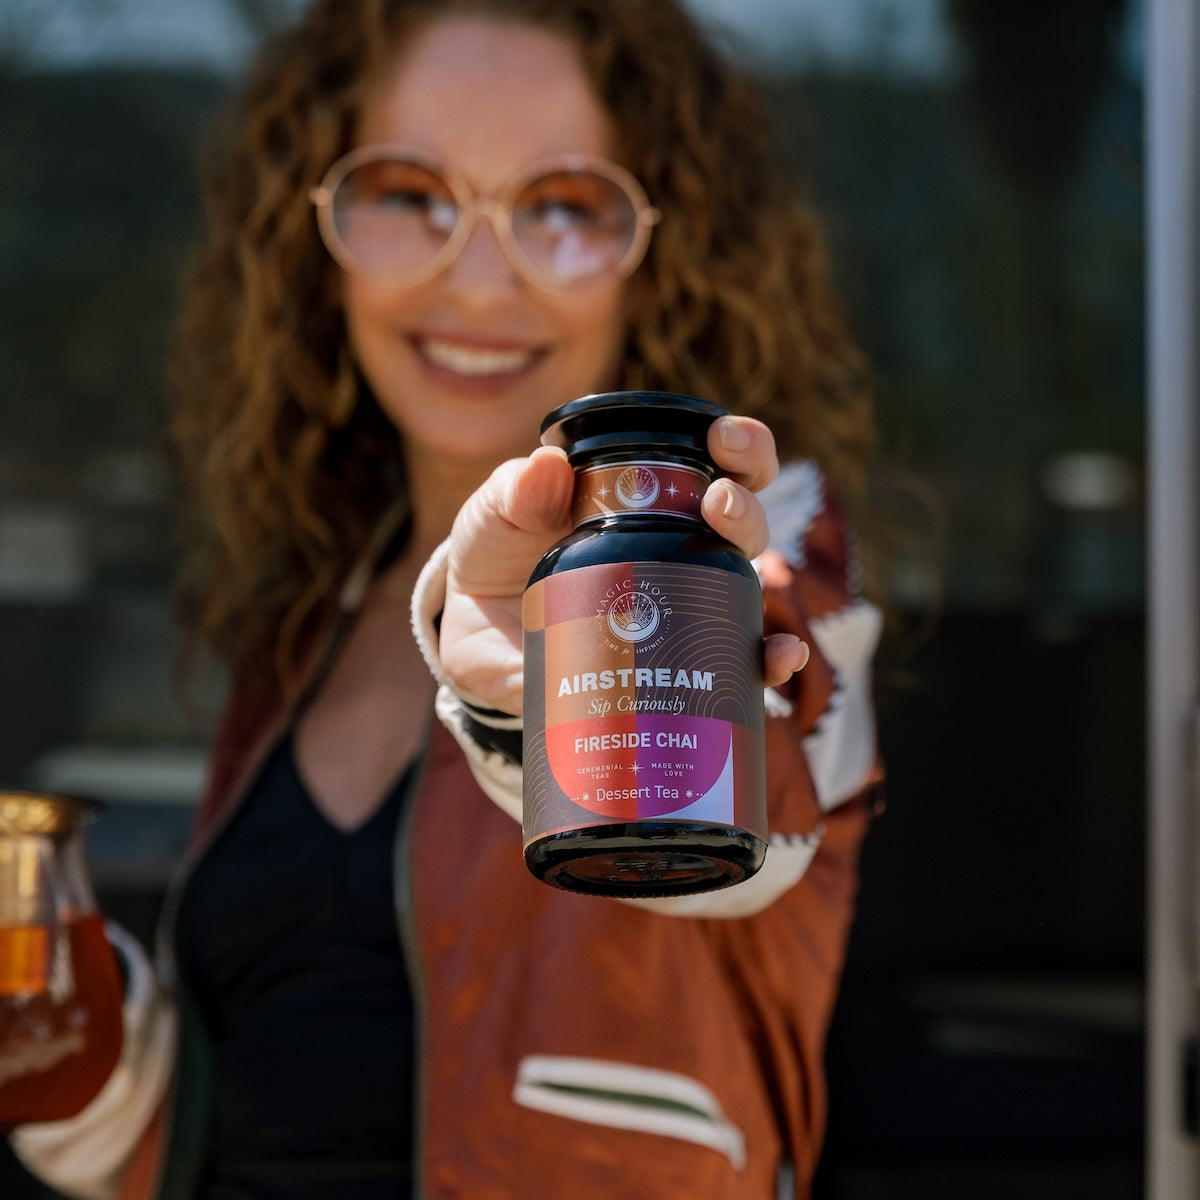 Zhena smiling in the background holding a violet glass apothecary jar of Fireside Chai herbal chai loose leaf tea.